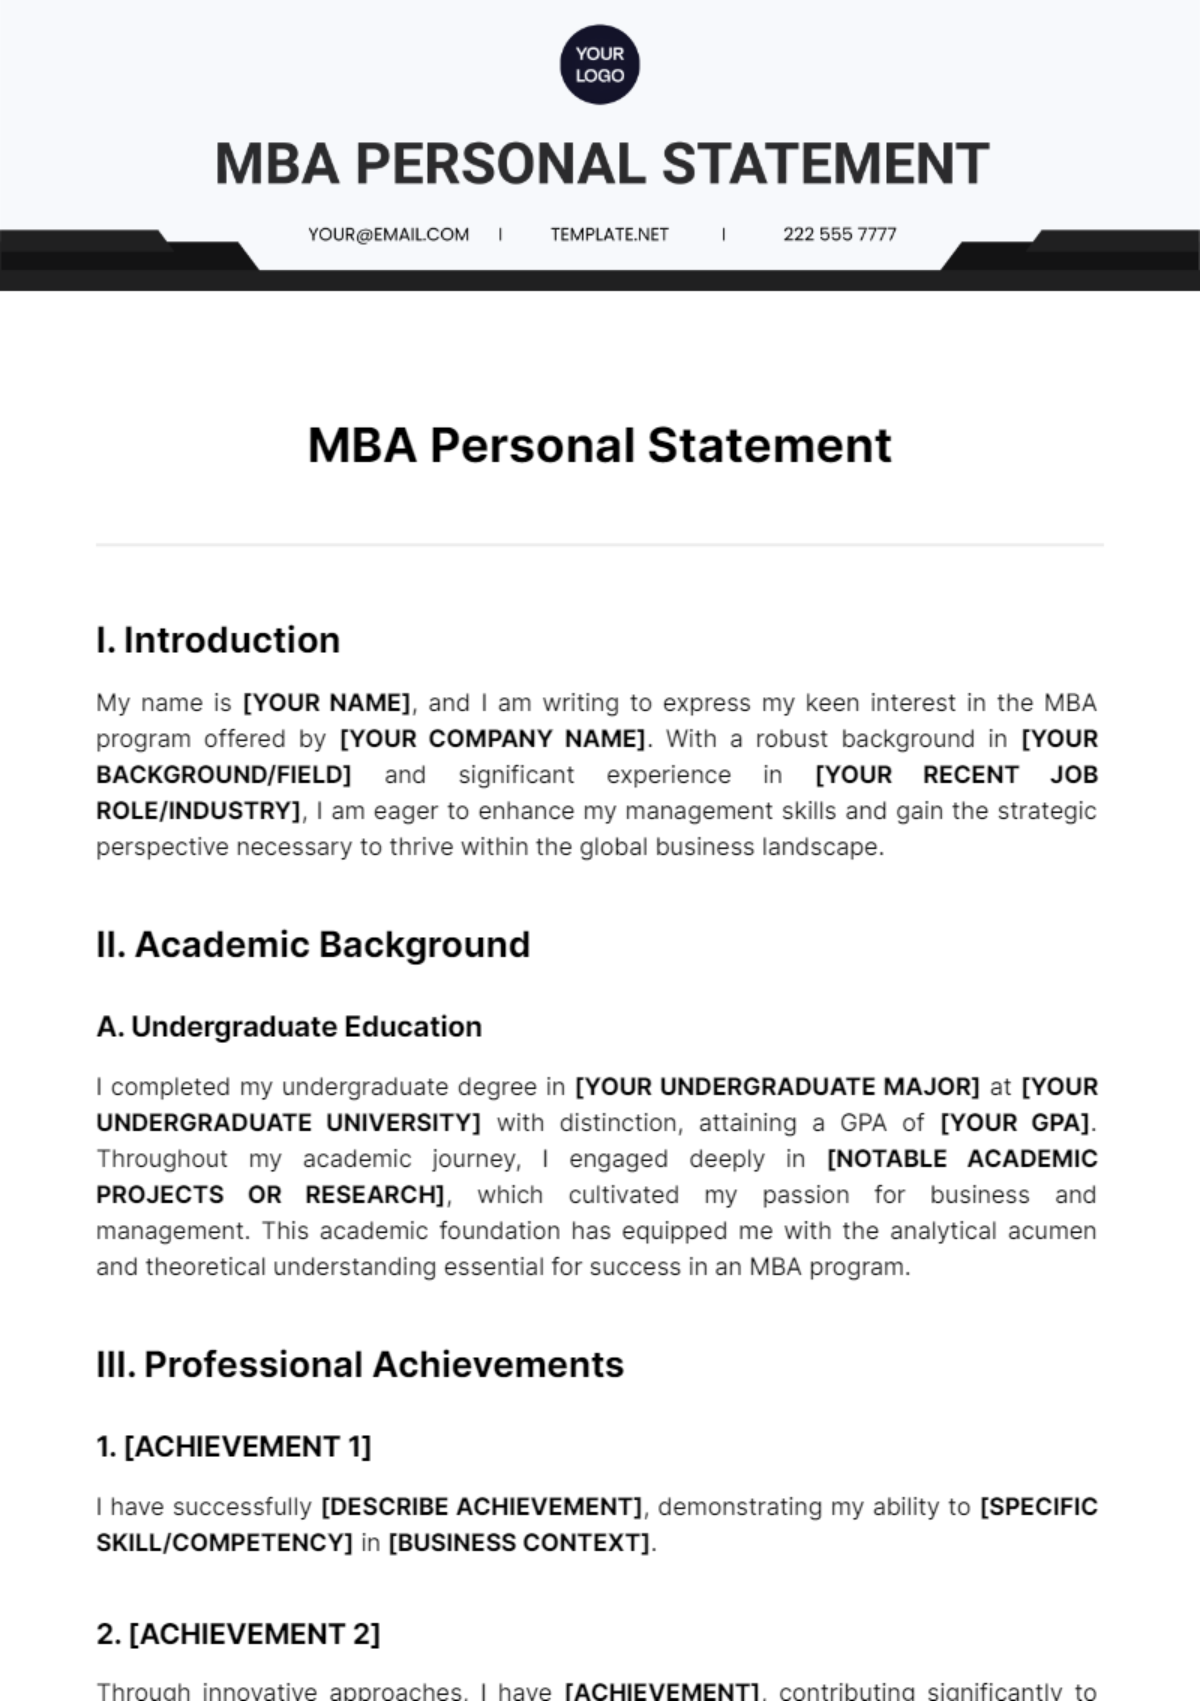 MBA Personal Statement Template